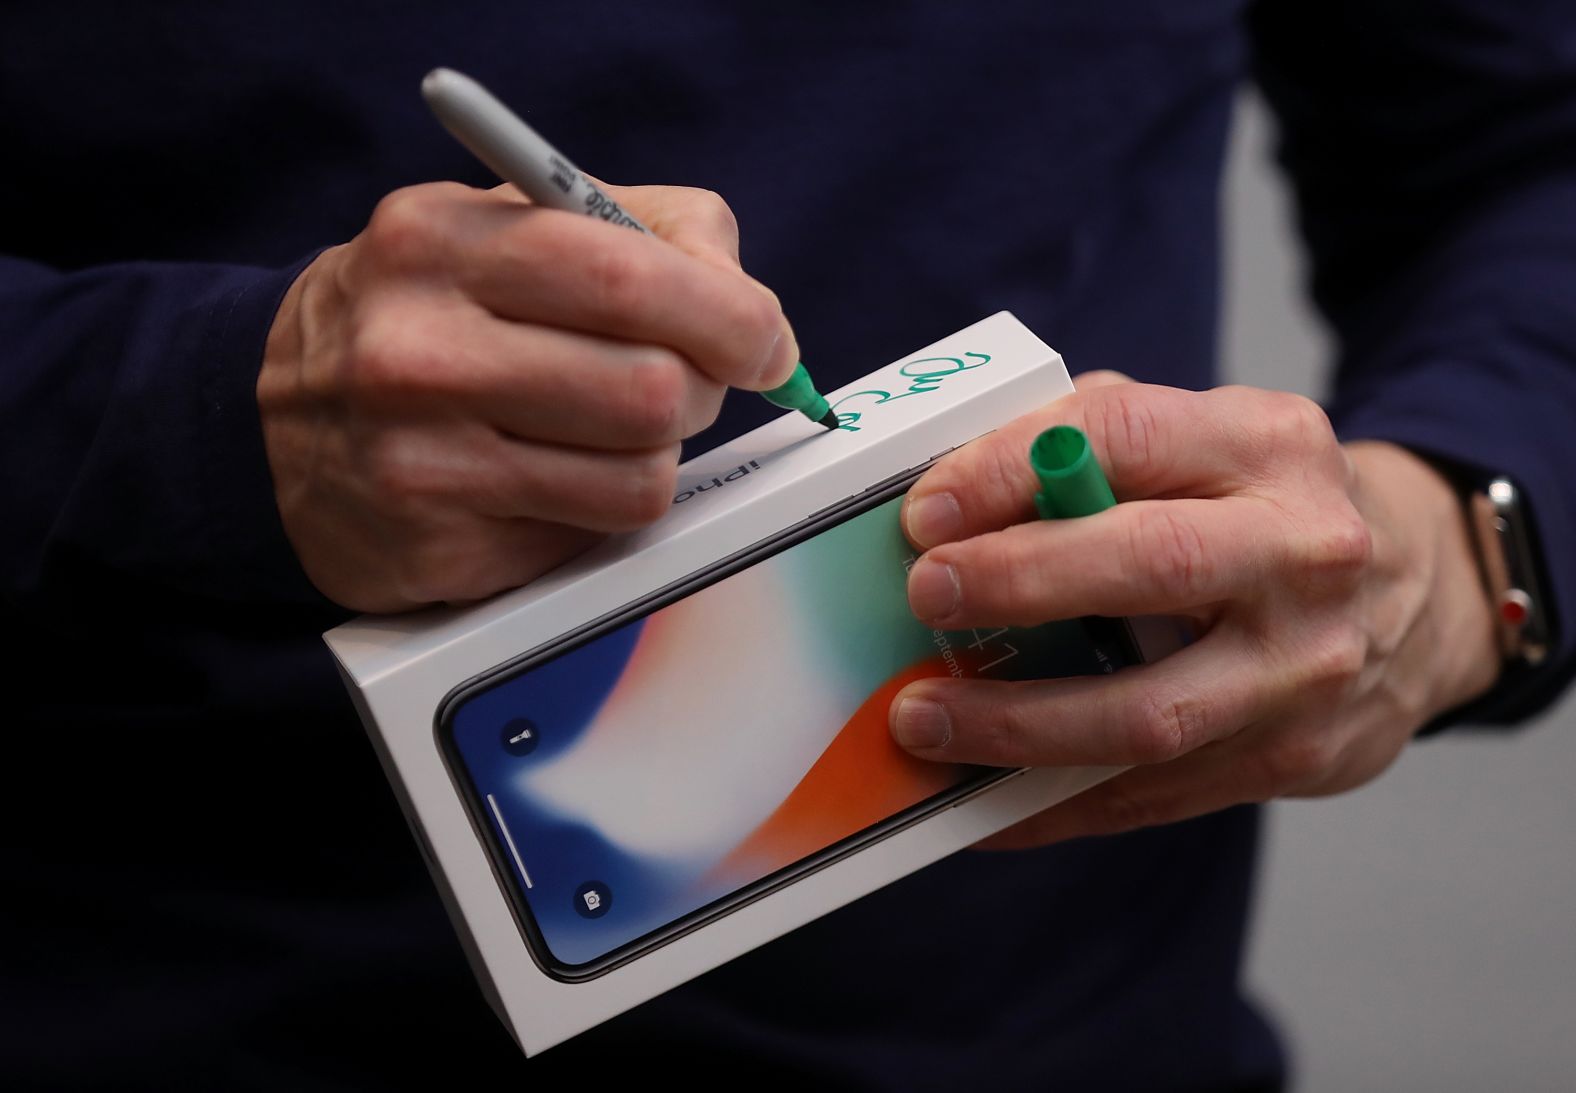 Tim Cook signs the box of a new iPhone X at an Apple Store in Palo Alto in November 2017. The highly anticipated iPhone X went on sale around the world that day. 